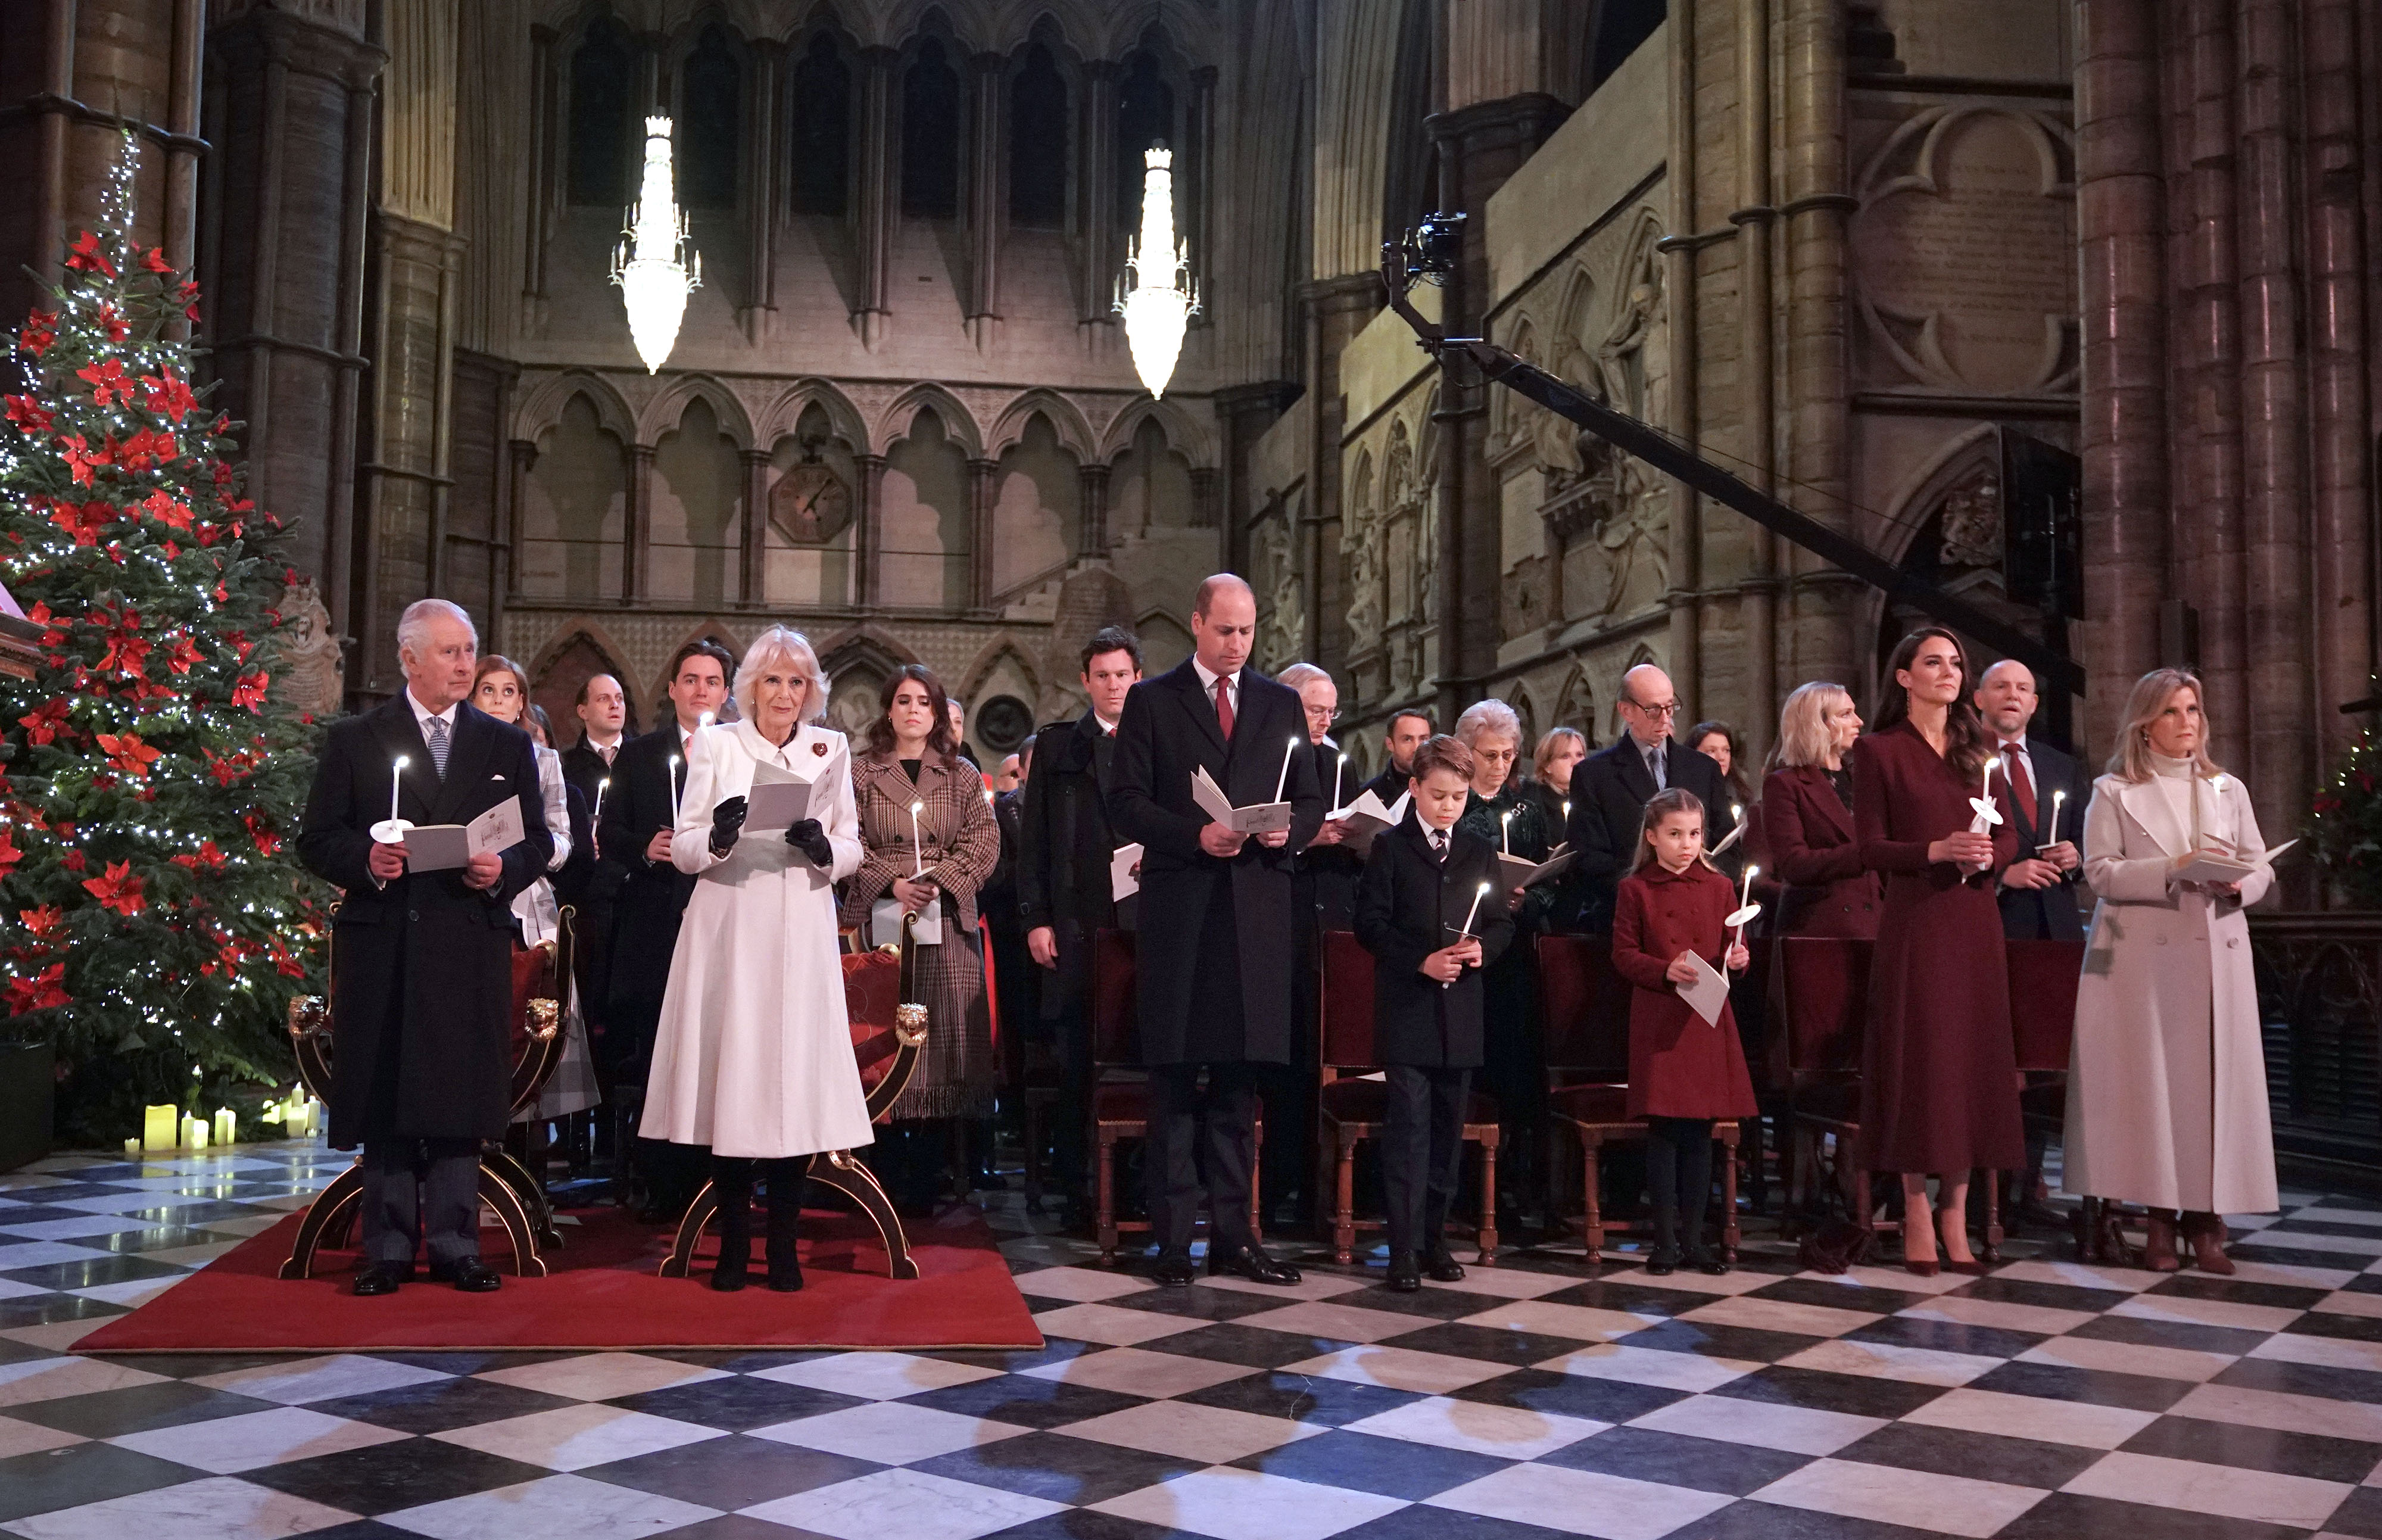 <p>King Charles III and Queen Consort Camilla scored throne-like chairs as they enjoyed Princess Kate's Together at Christmas carol service at Westminster Abbey in London on Dec. 15, 2022. They were seated alongside Prince William, Prince George, Princess Charlotte, Kate and Sophie, Countess of Wessex in the front row, with less senior royals behind them.</p>